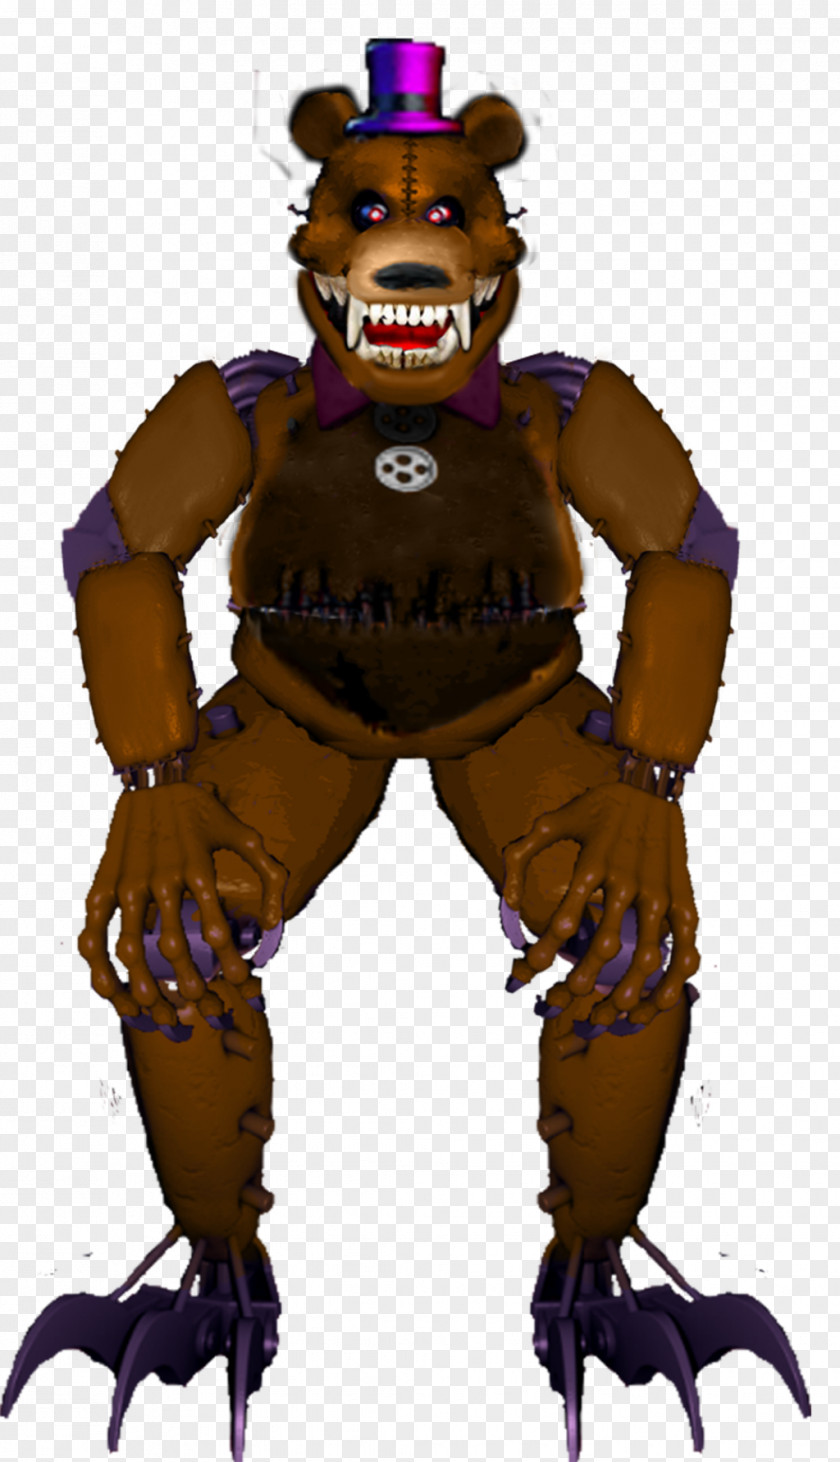 Monster Five Nights At Freddy's 4 3 Freddy's: Sister Location 2 Hunter Tri PNG